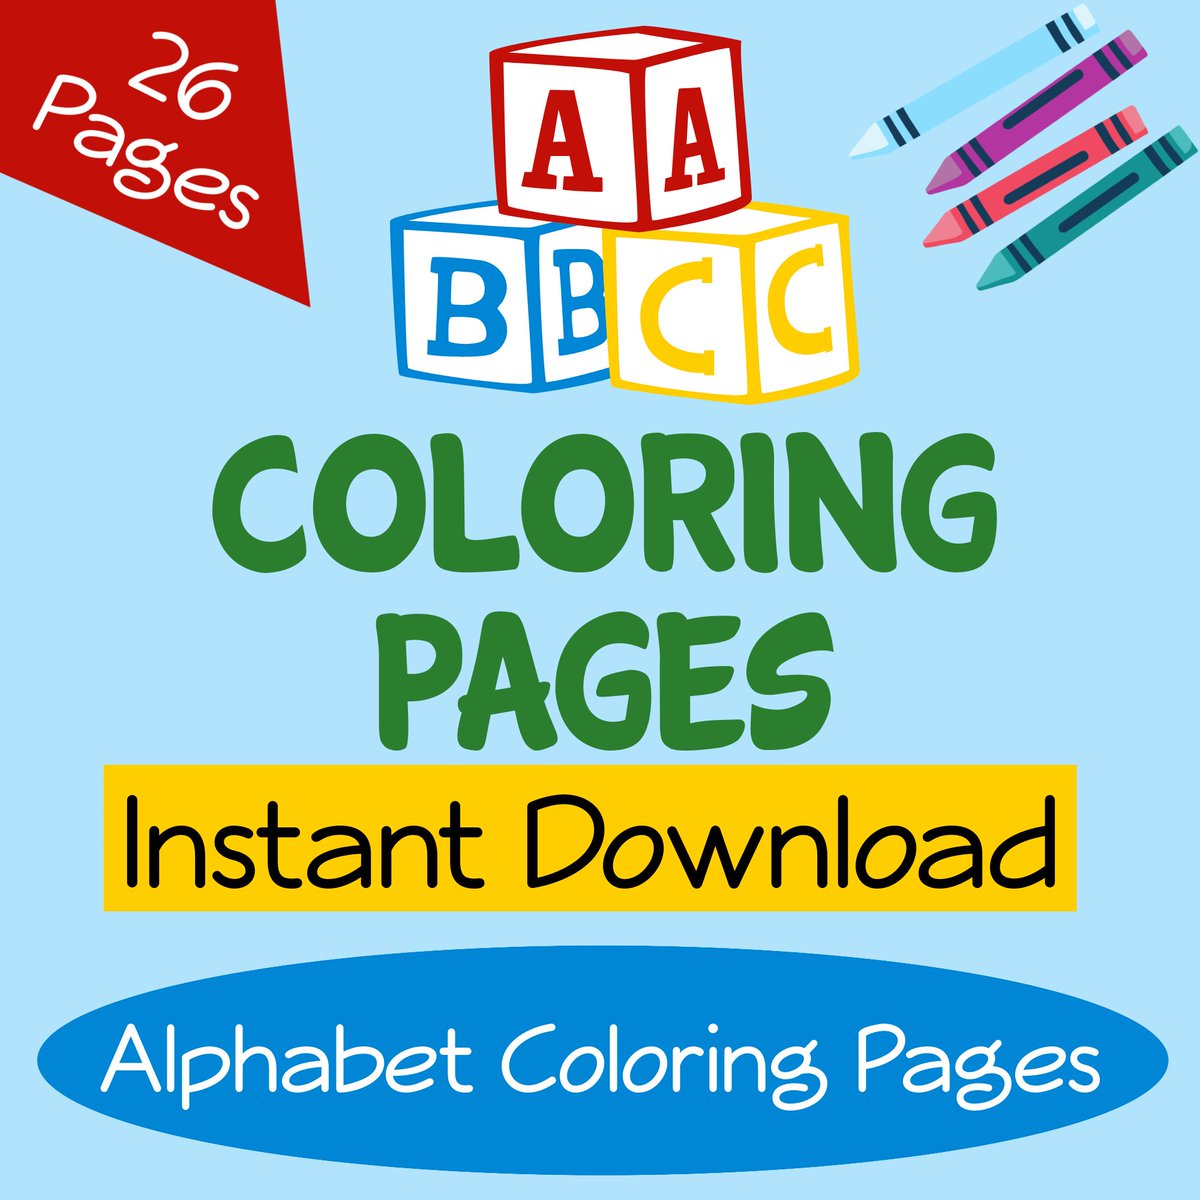 Keep kids busy and learning with these fun ABC coloring pages. #ColoringFun #LearningIsFun

diansdeals.etsy.com/listing/158274…